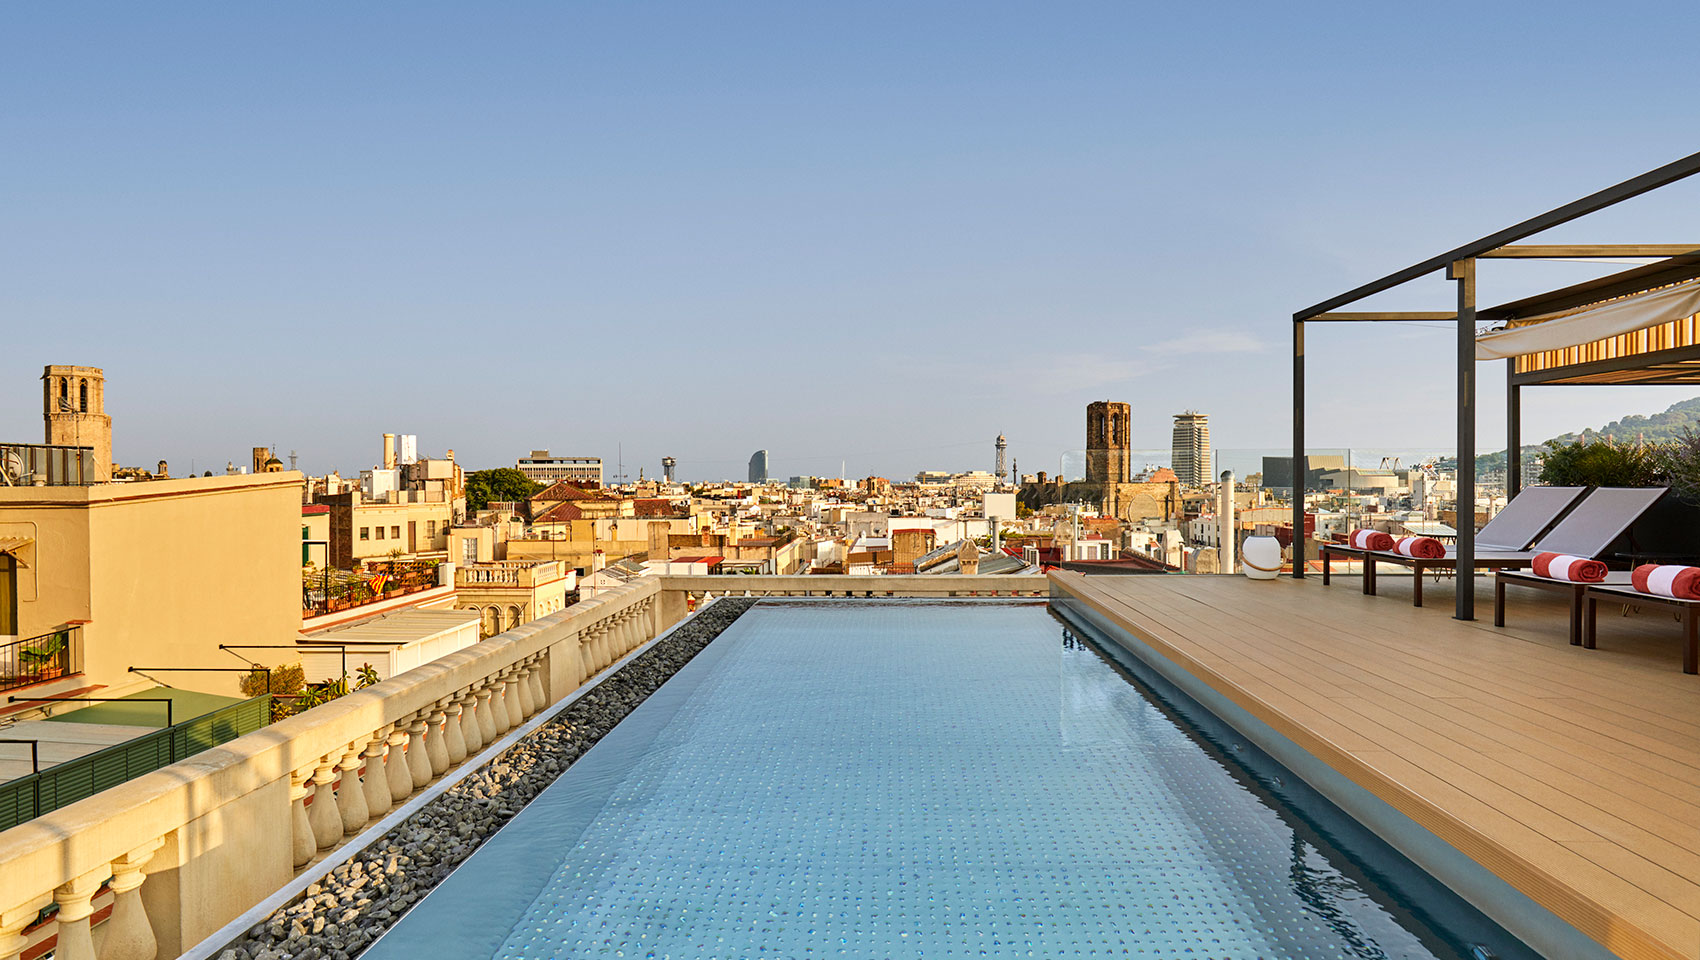 Infinity pool with views of the authentic Barcelona